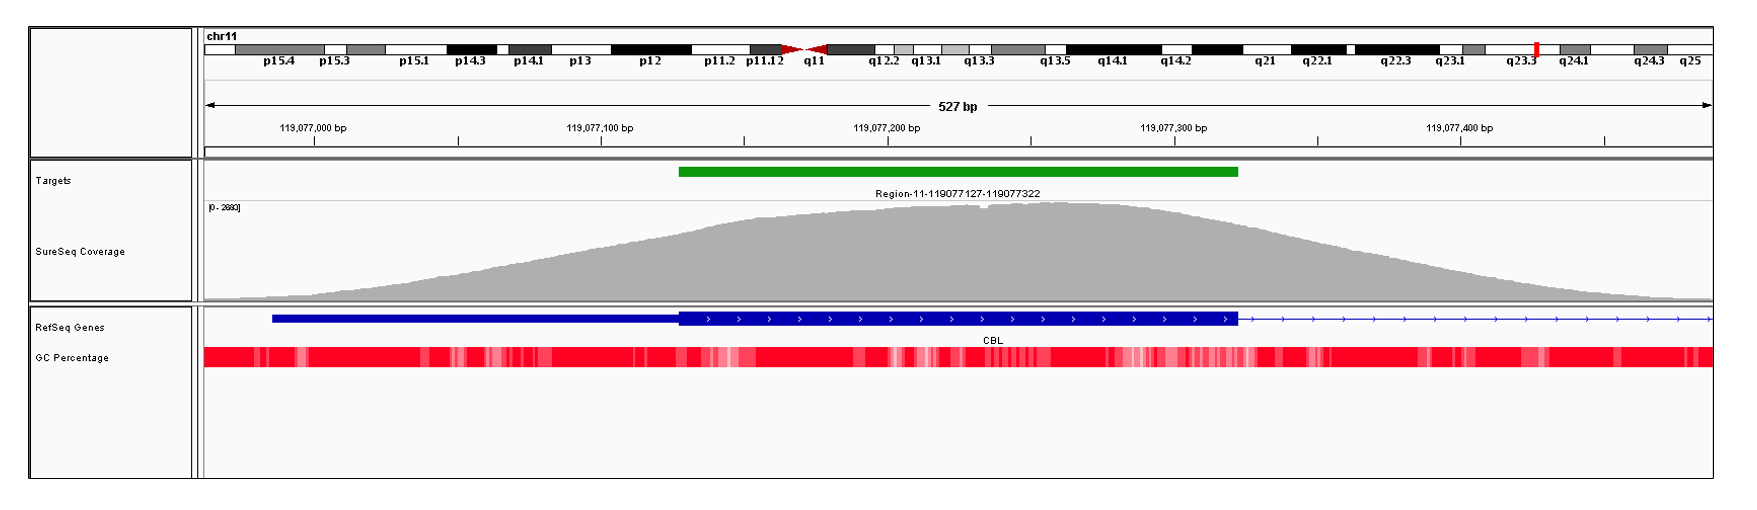 CBL Exon 1 (hg19 chr11:119076986-119077322). Depth of coverage per base (grey). Targeted region (green). Gene coding region as defined by RefSeq (blue). GC percentage (red). Image